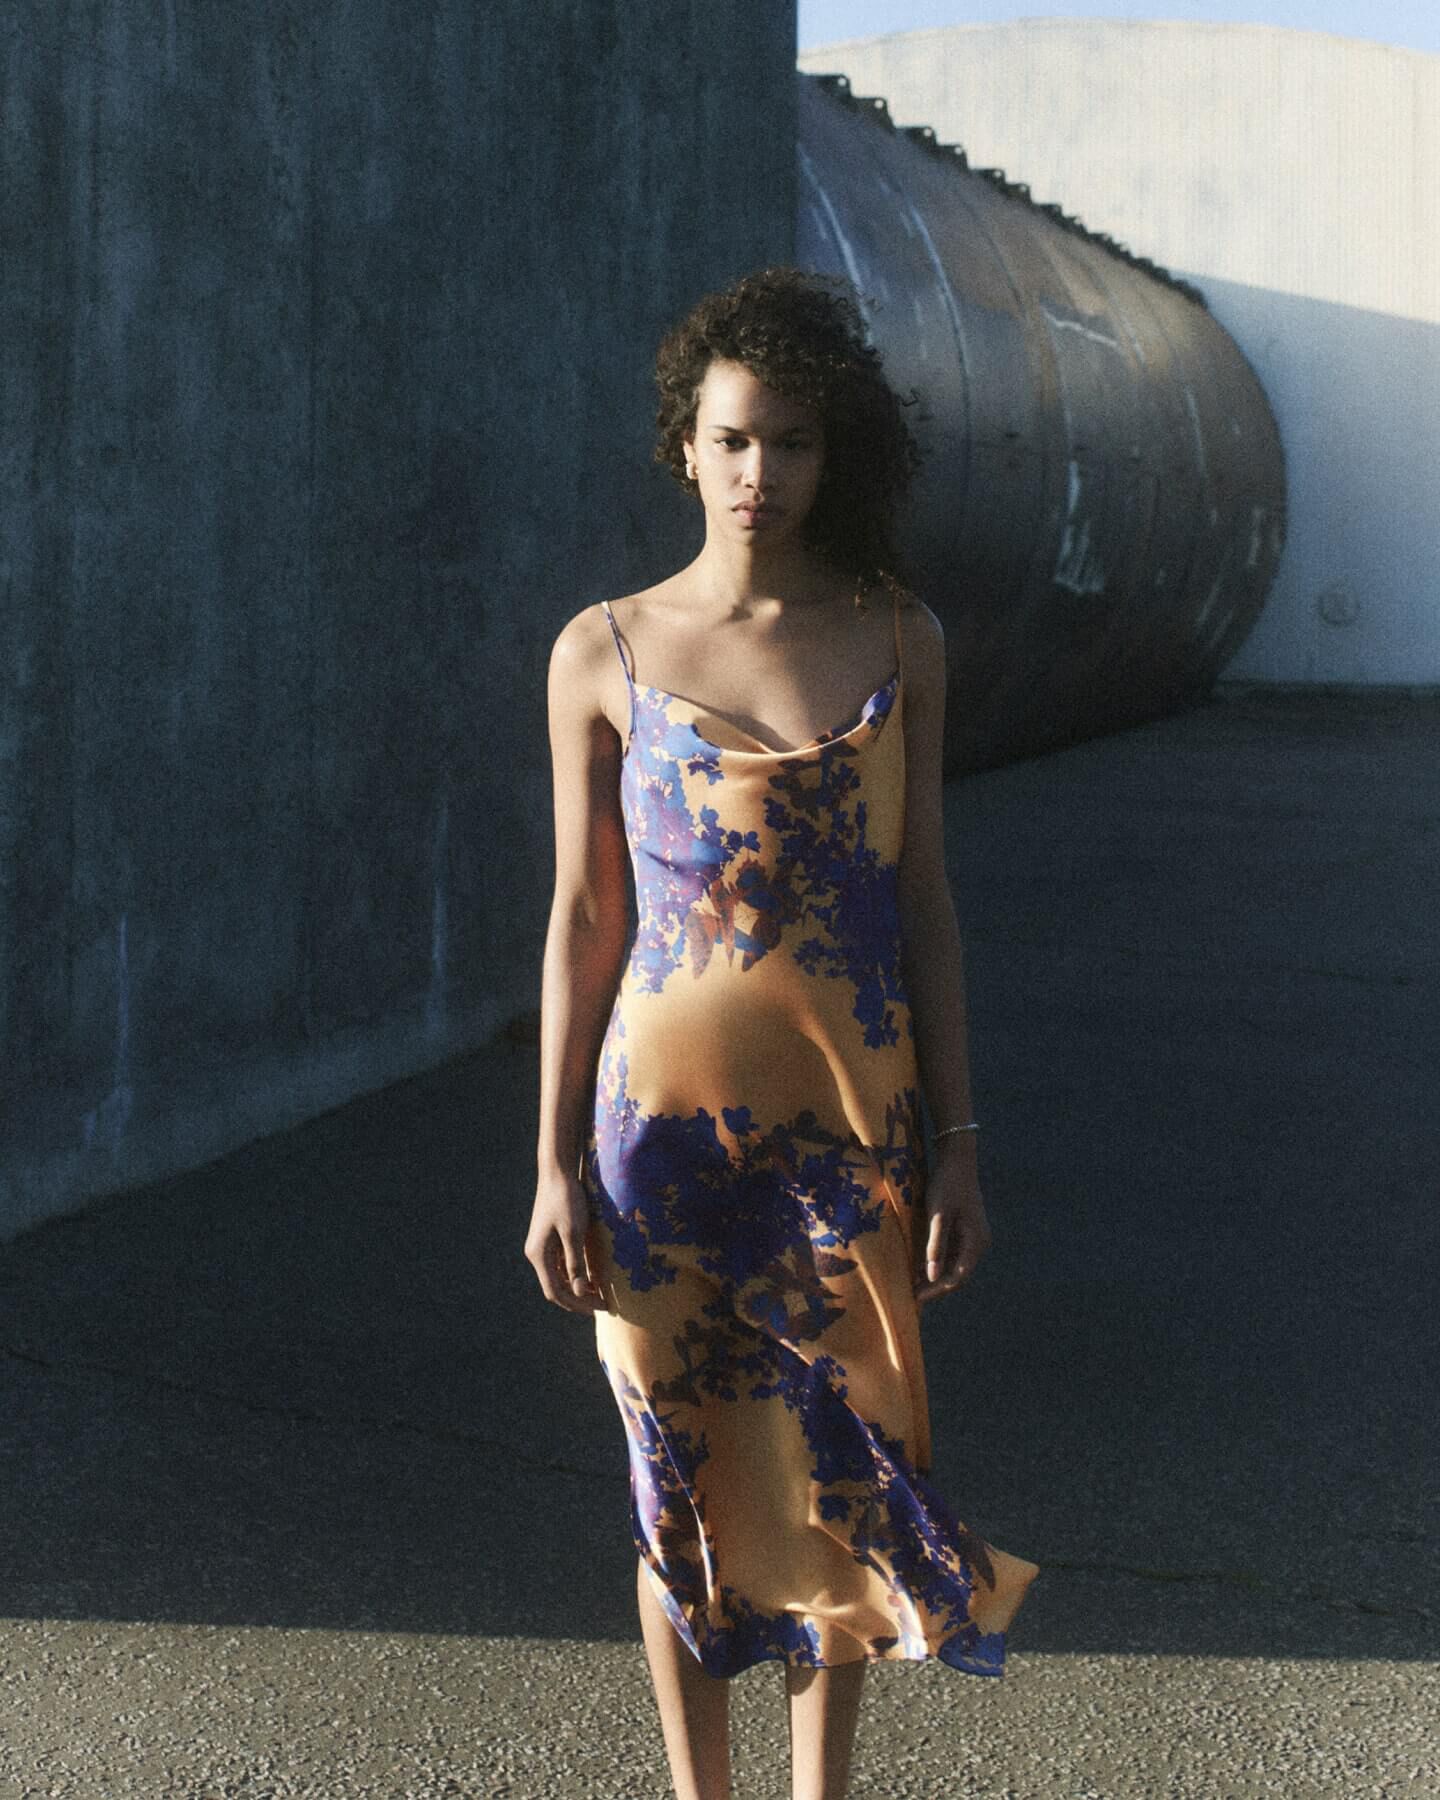 Woman wearing an orange slip dress with purple florals standing in front of a concrete structure